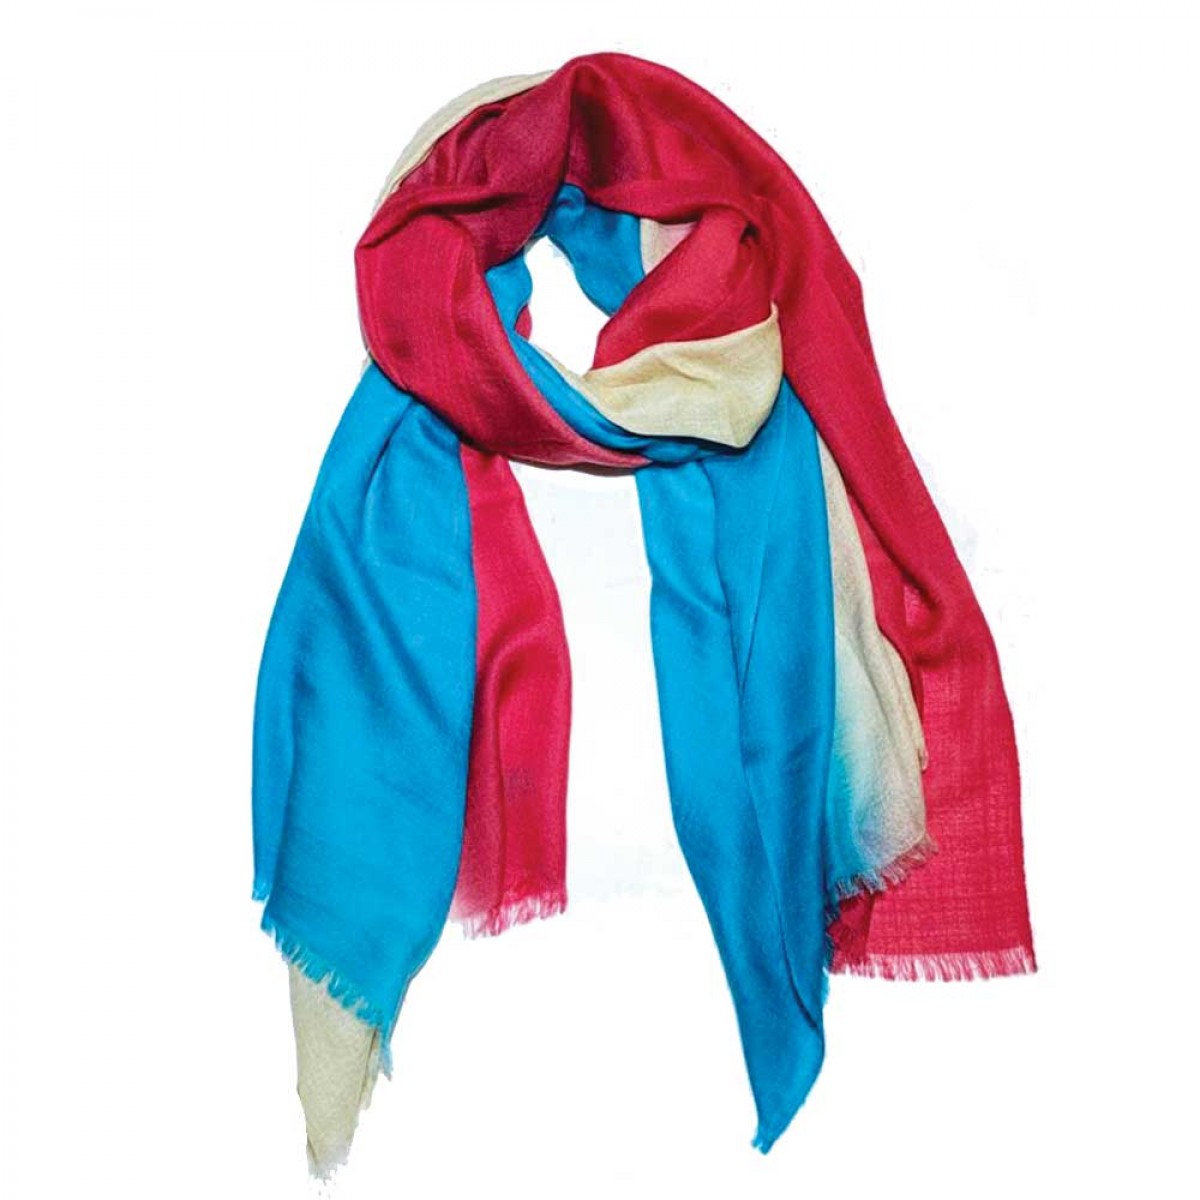 Ombre Pashmina Shawl - Blue & Red